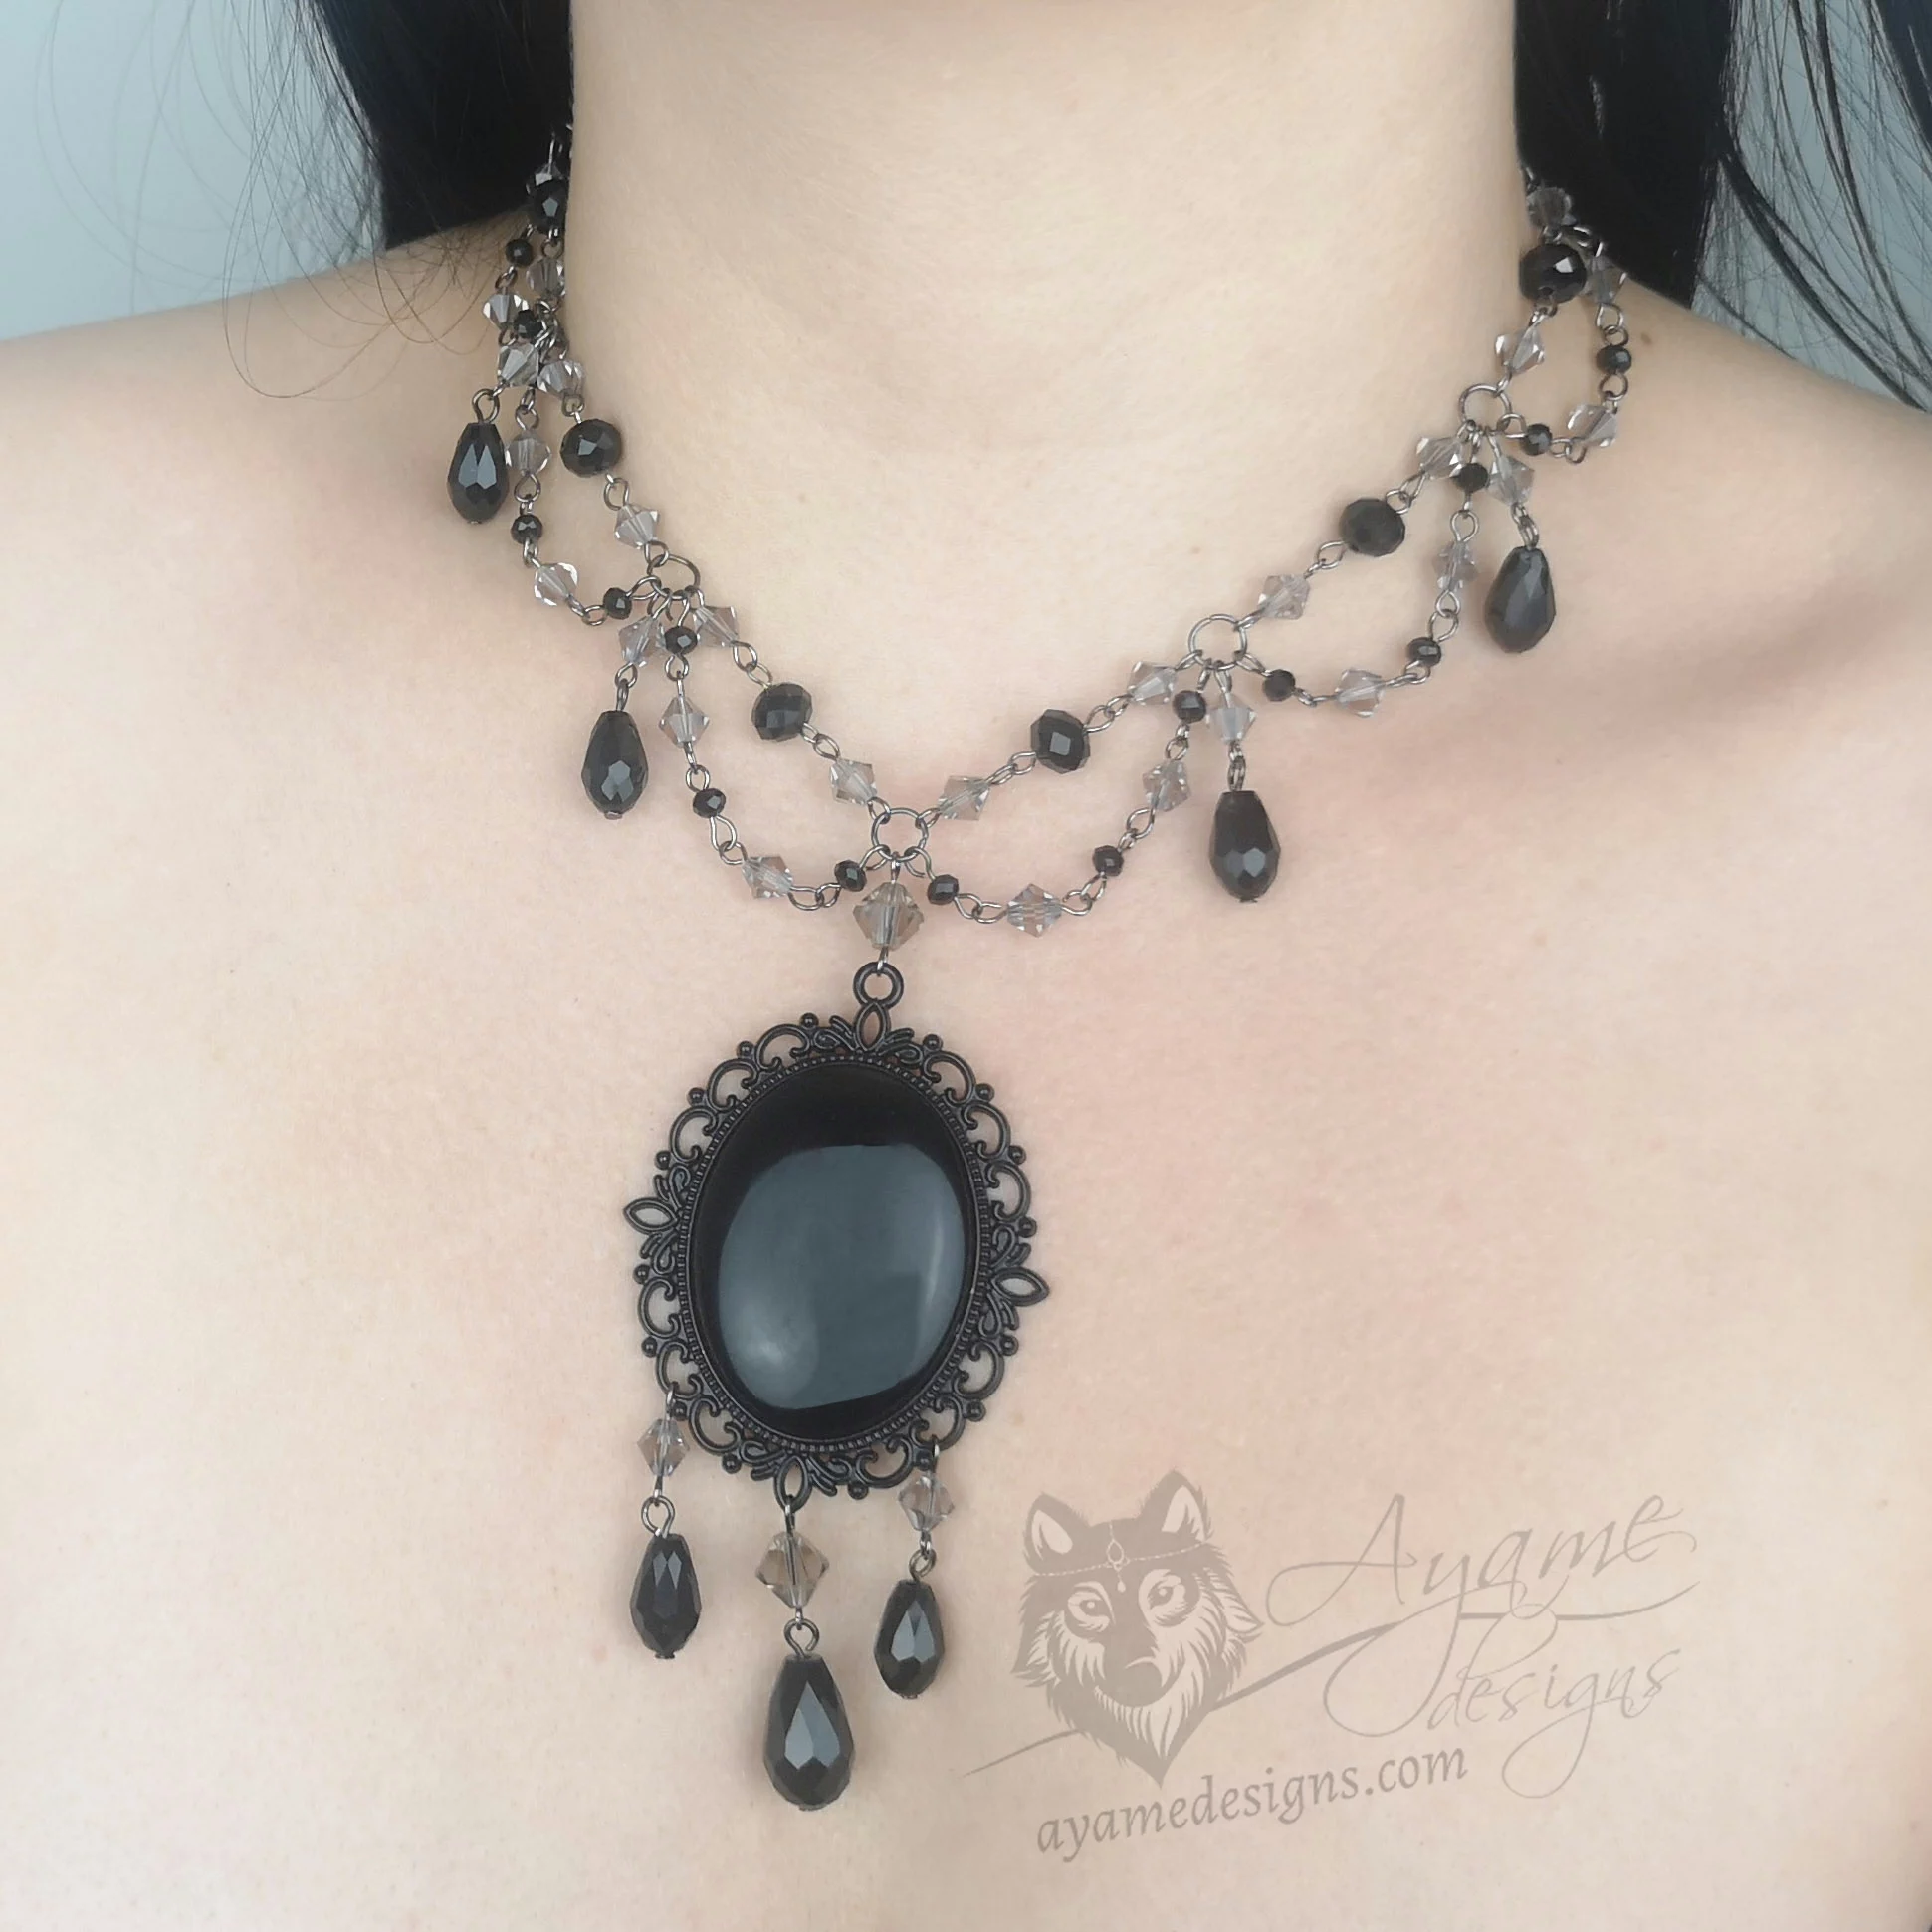 Handmade adjustable Victorian gothic choker necklace with grey and black Austrian crystal beads and a large black resin cabochon pendant in a silver filigree frame